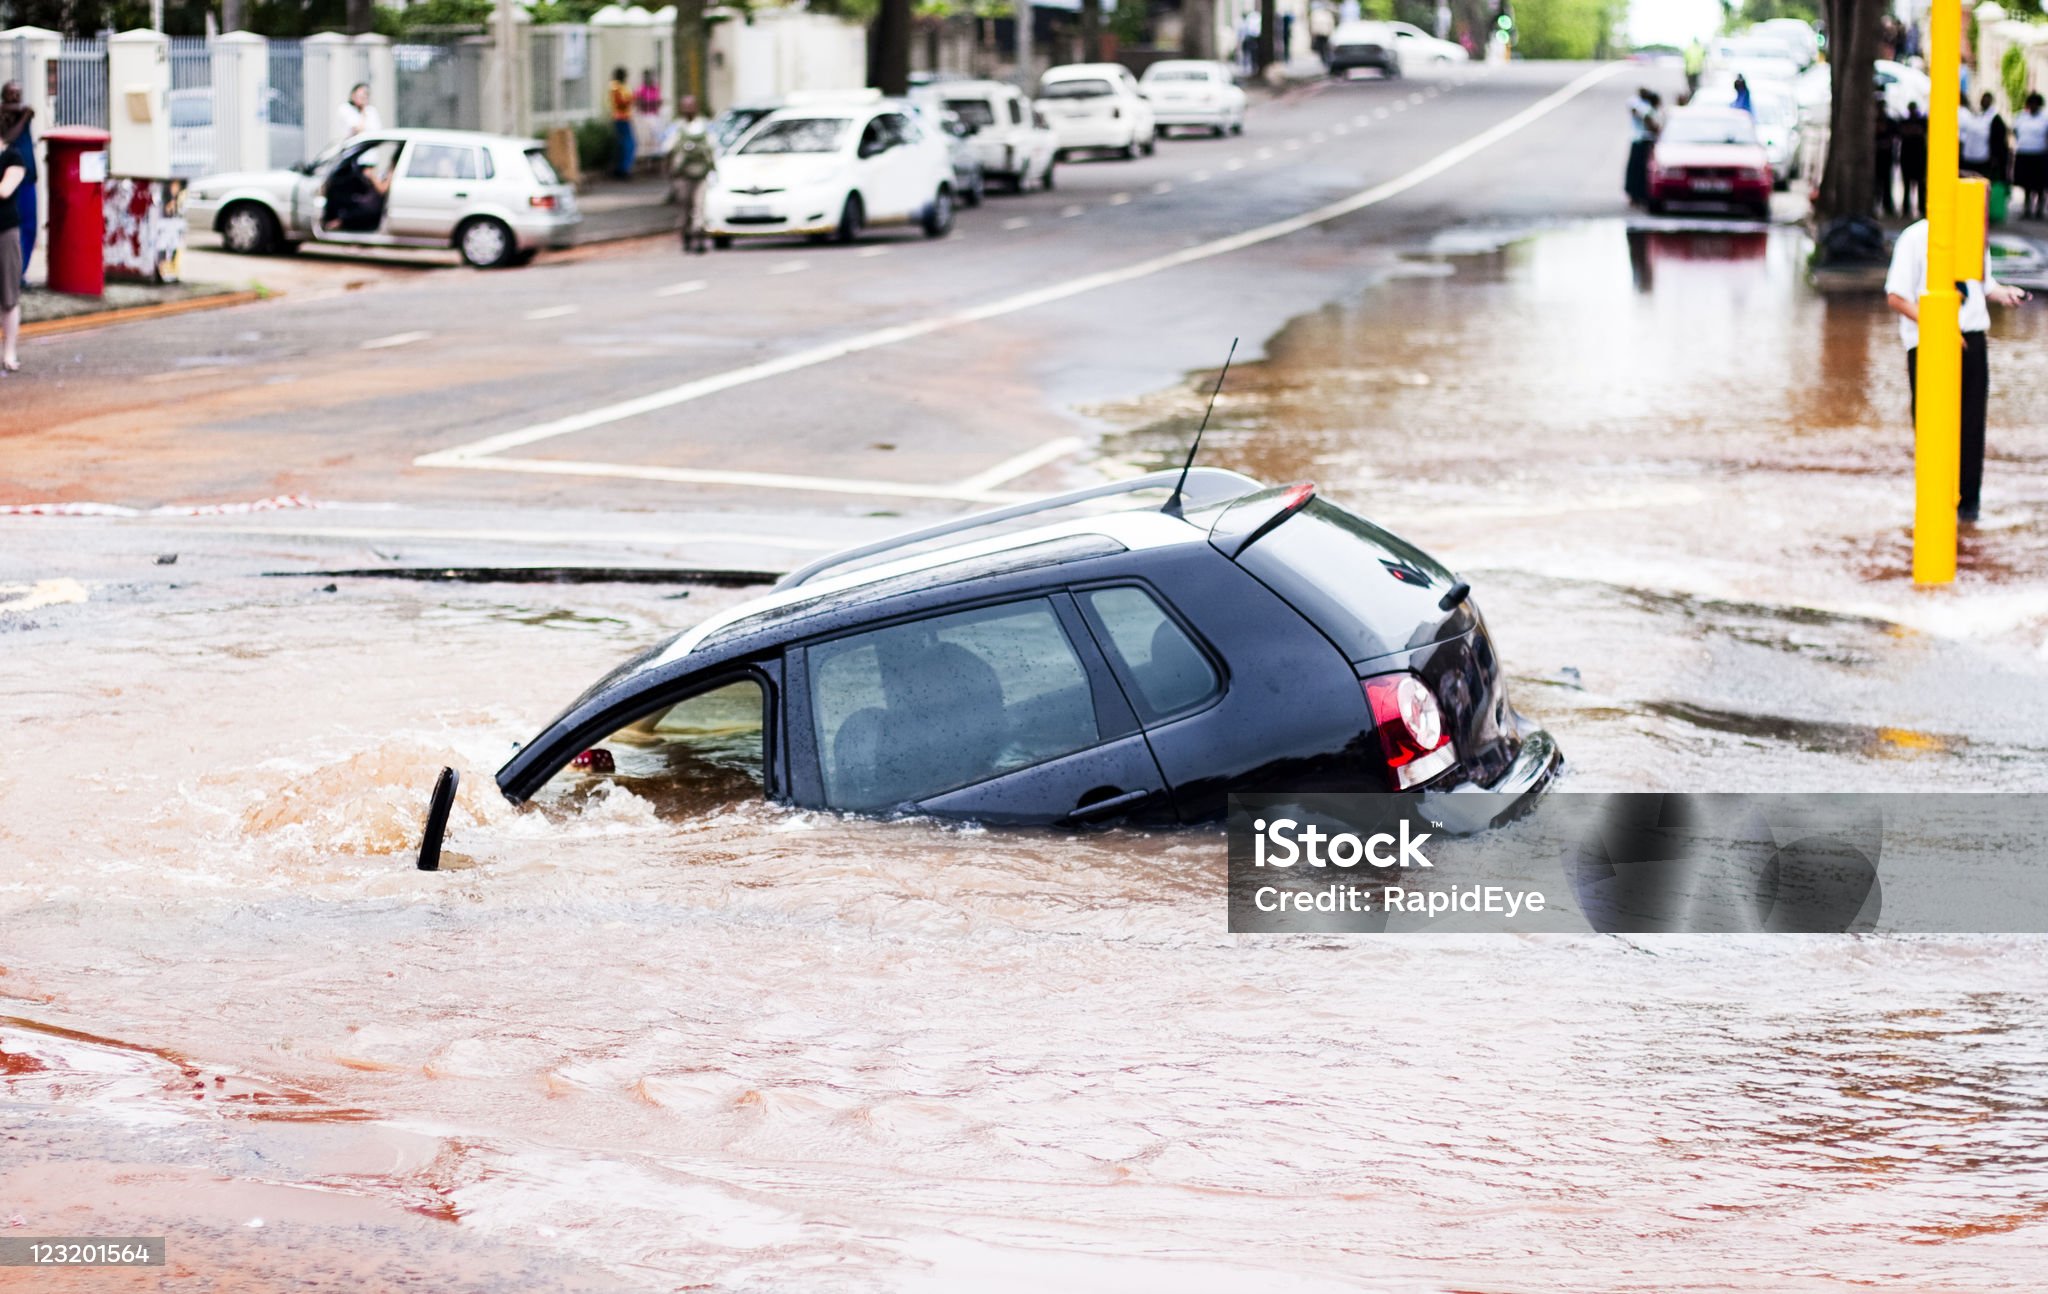 car-tips-into-pothole-in-flooded-street-side-view.jpg